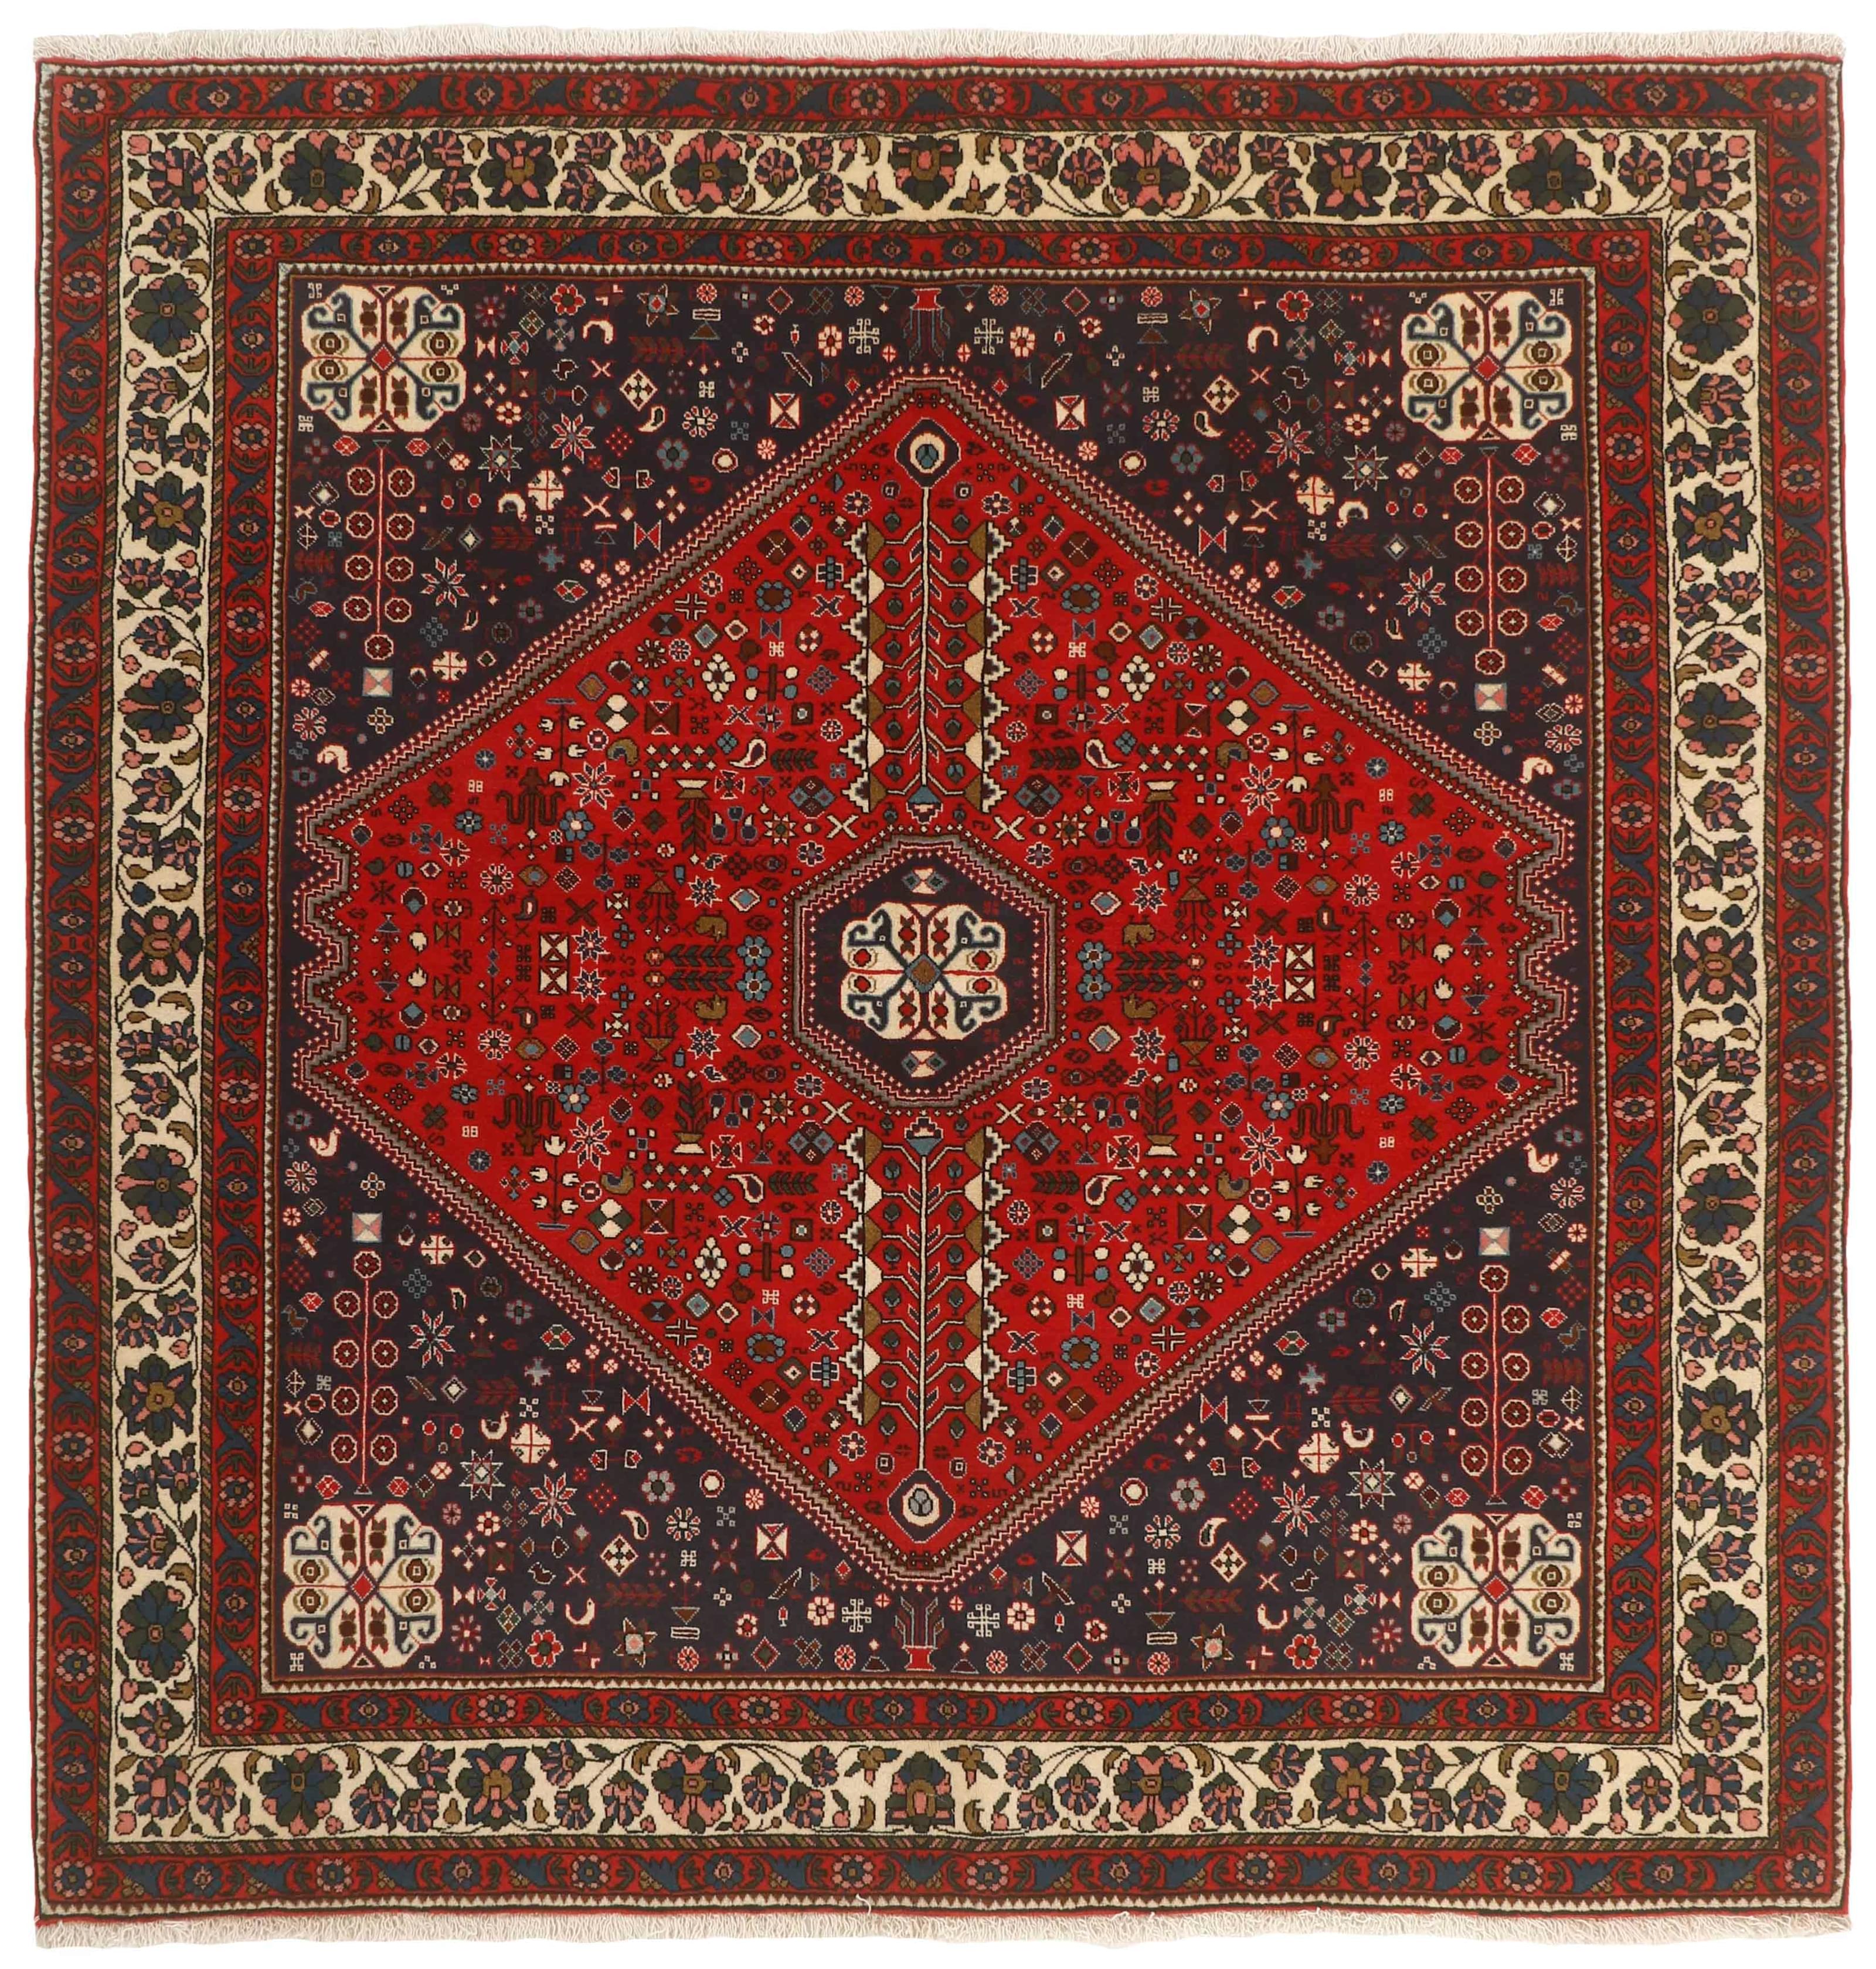 Authentic persian square rug with traditional tribal geometric design in red, ivory, black and brown